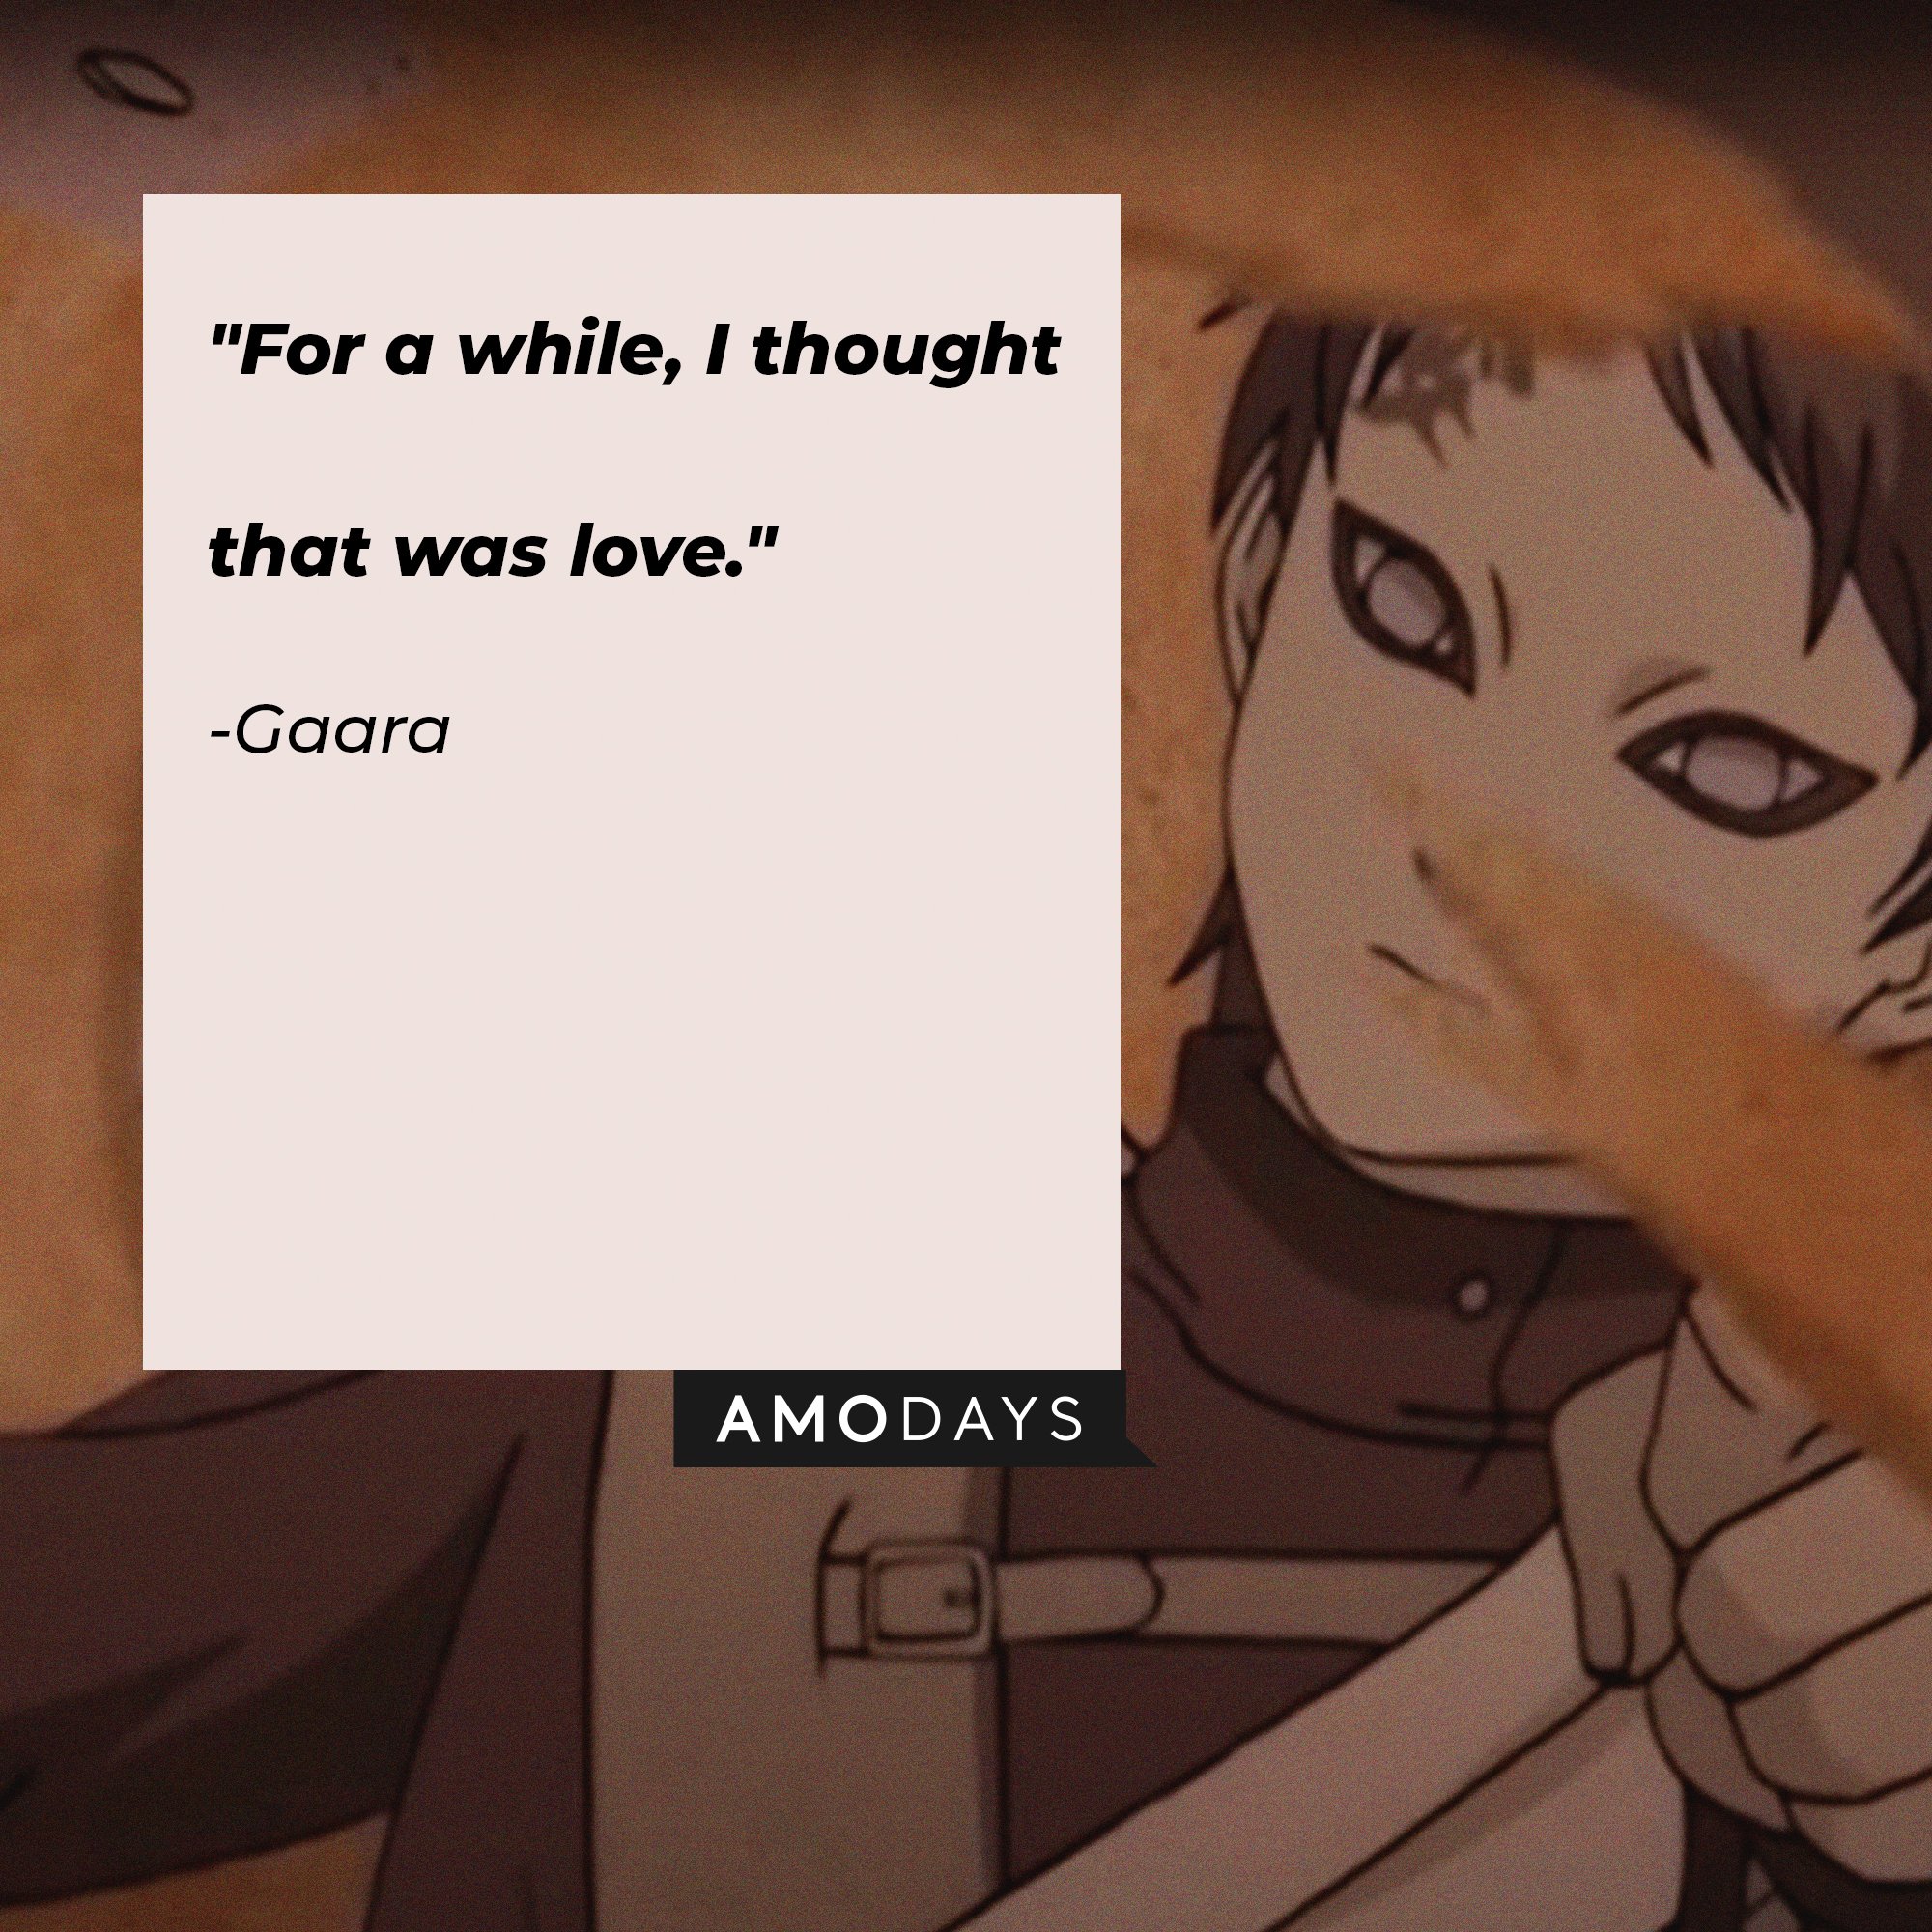 Gaara’s quote: "For a while, I thought that was love." | Image: AmoDays